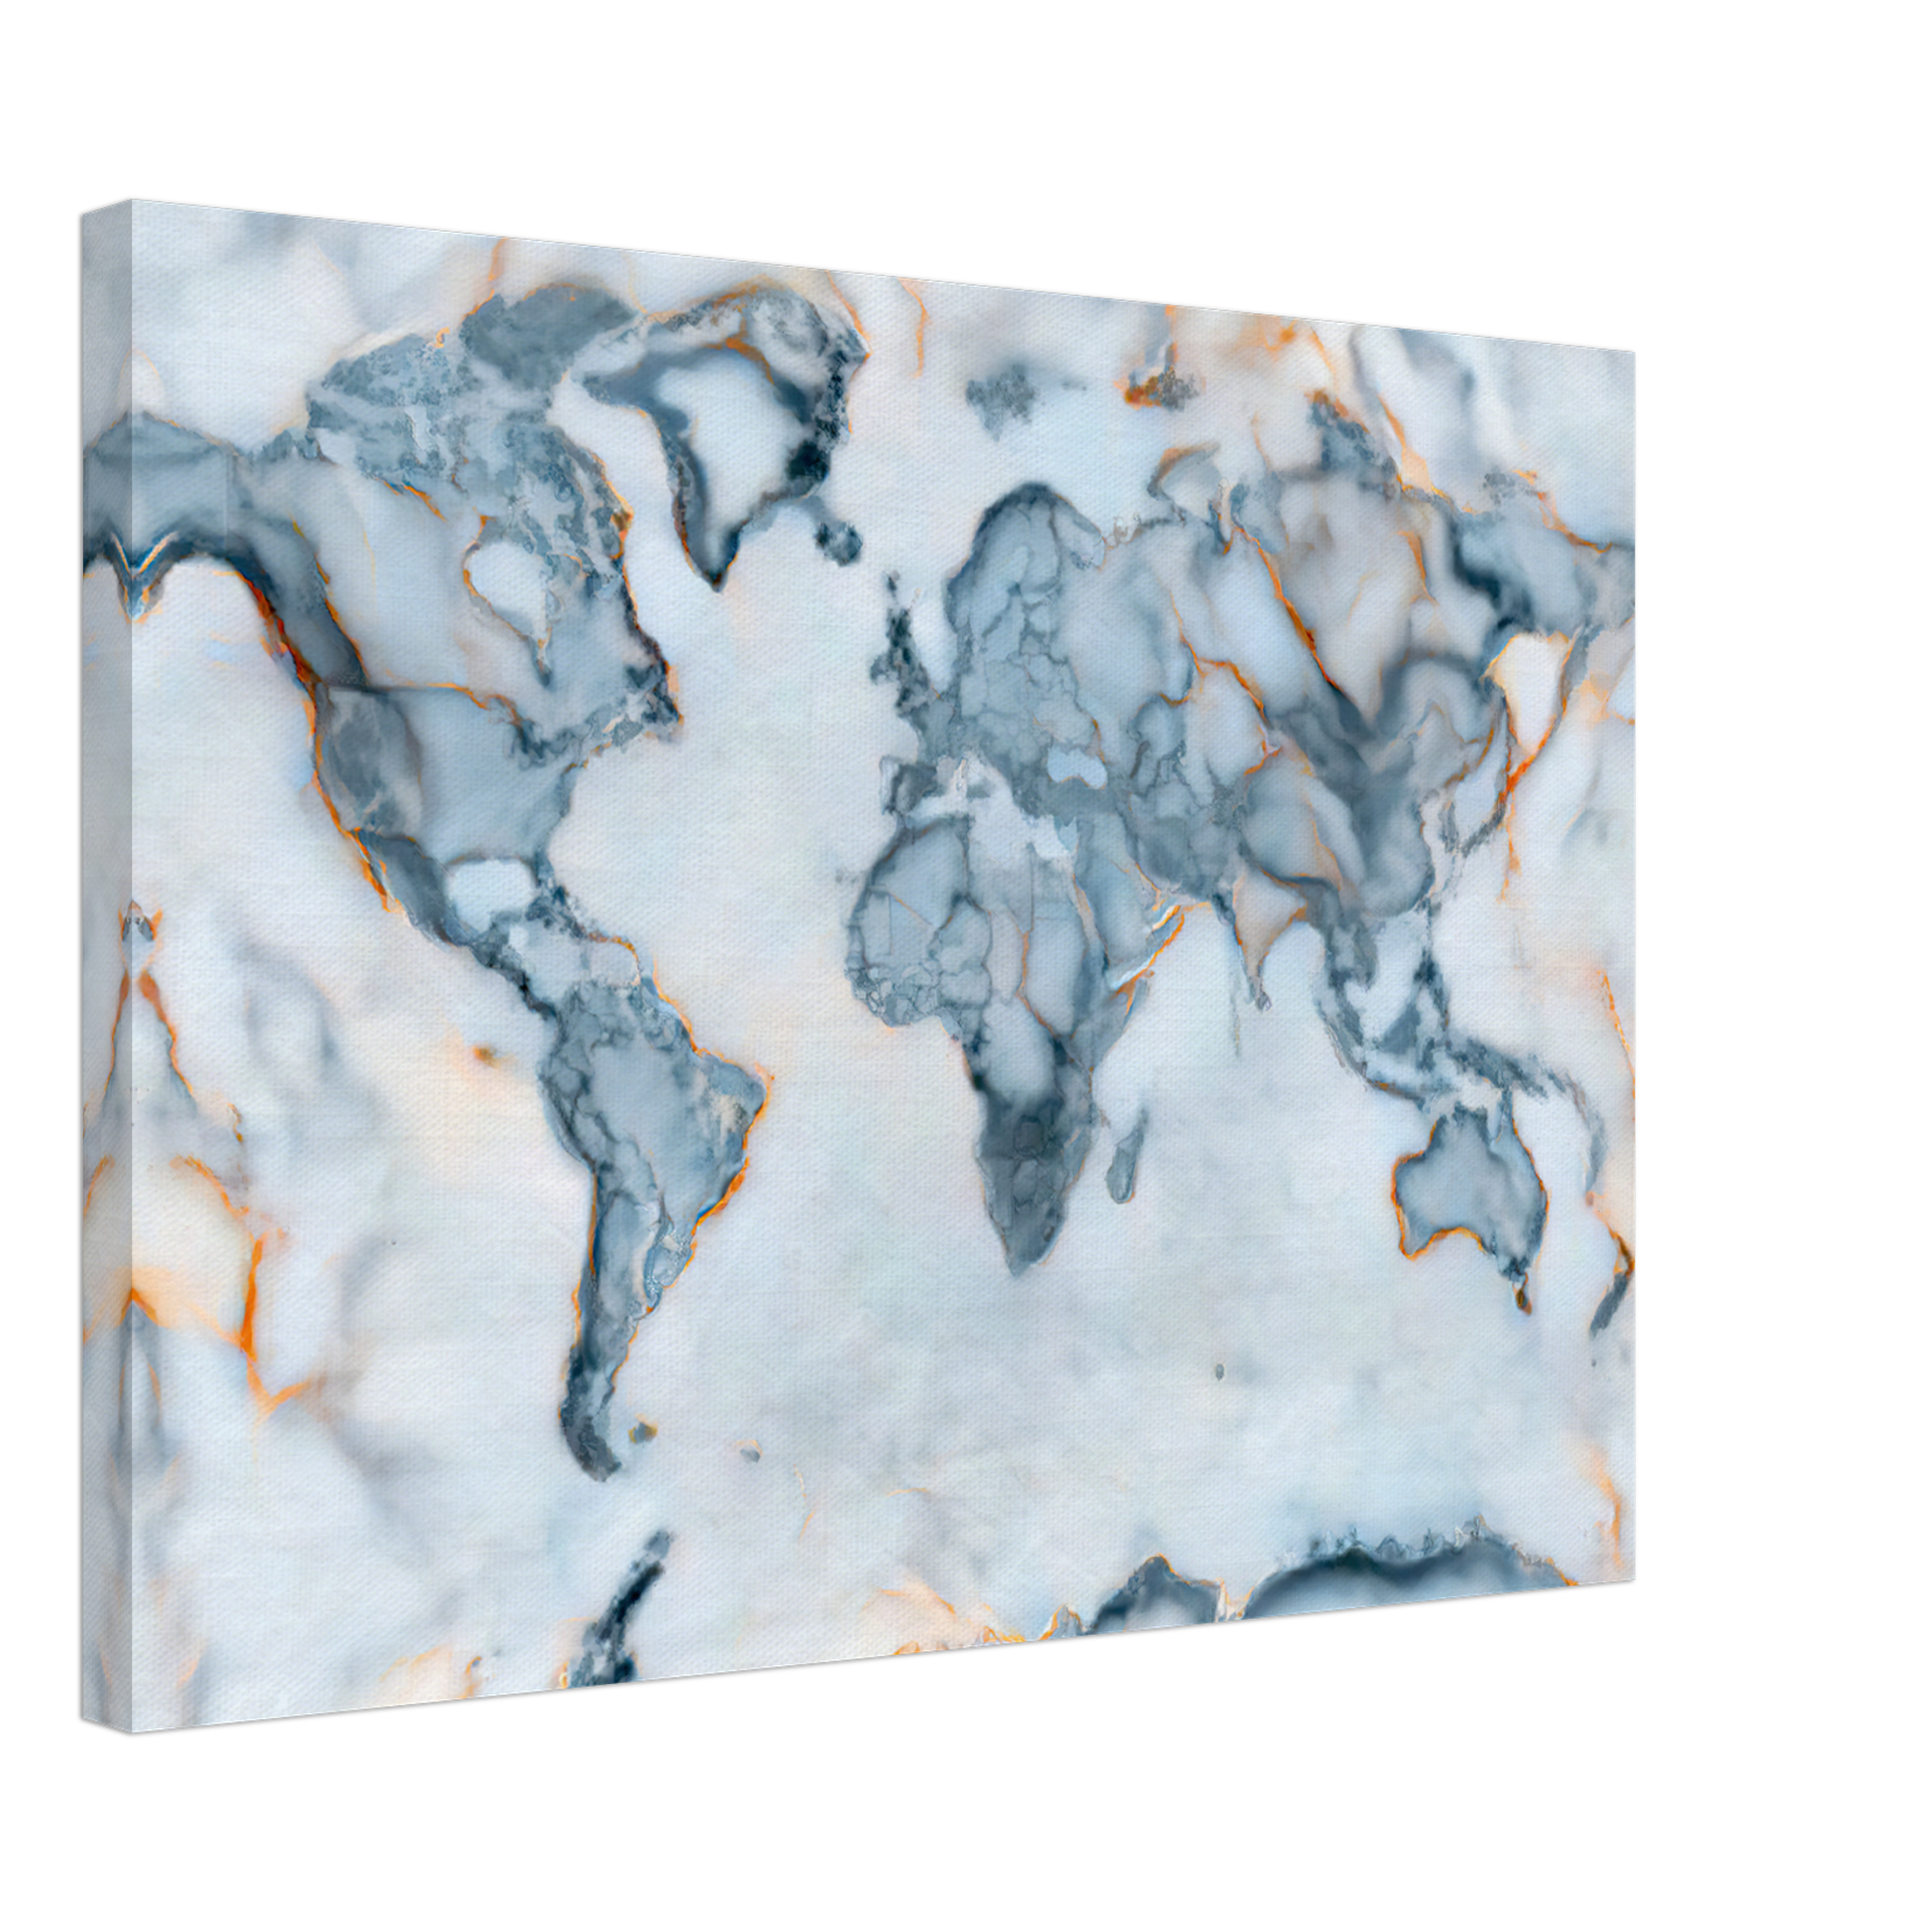 World Marble Map Canvas